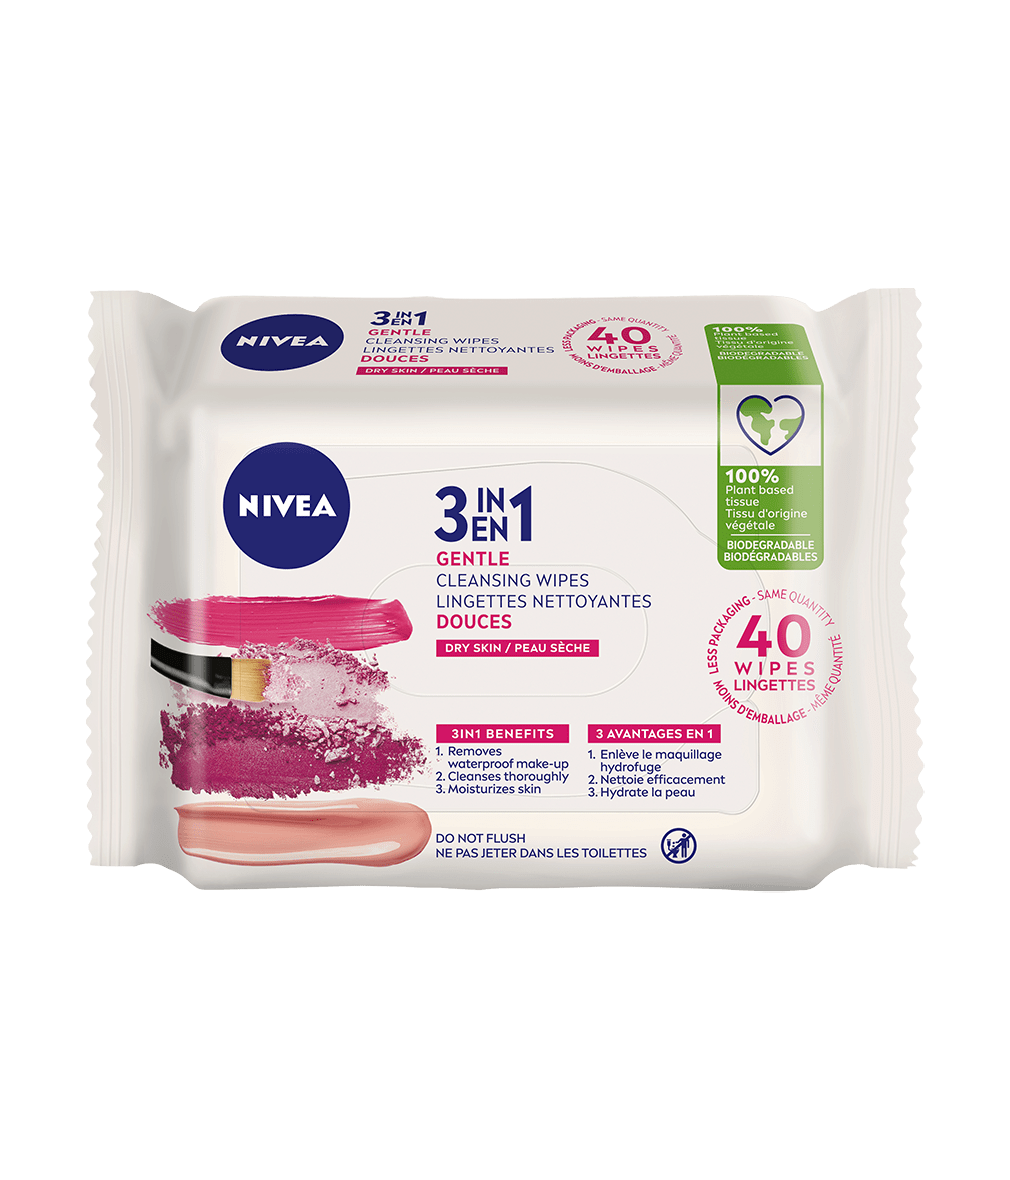 3-IN-1 BIODEGRADABLE DRY SKIN CLEANSING WIPES